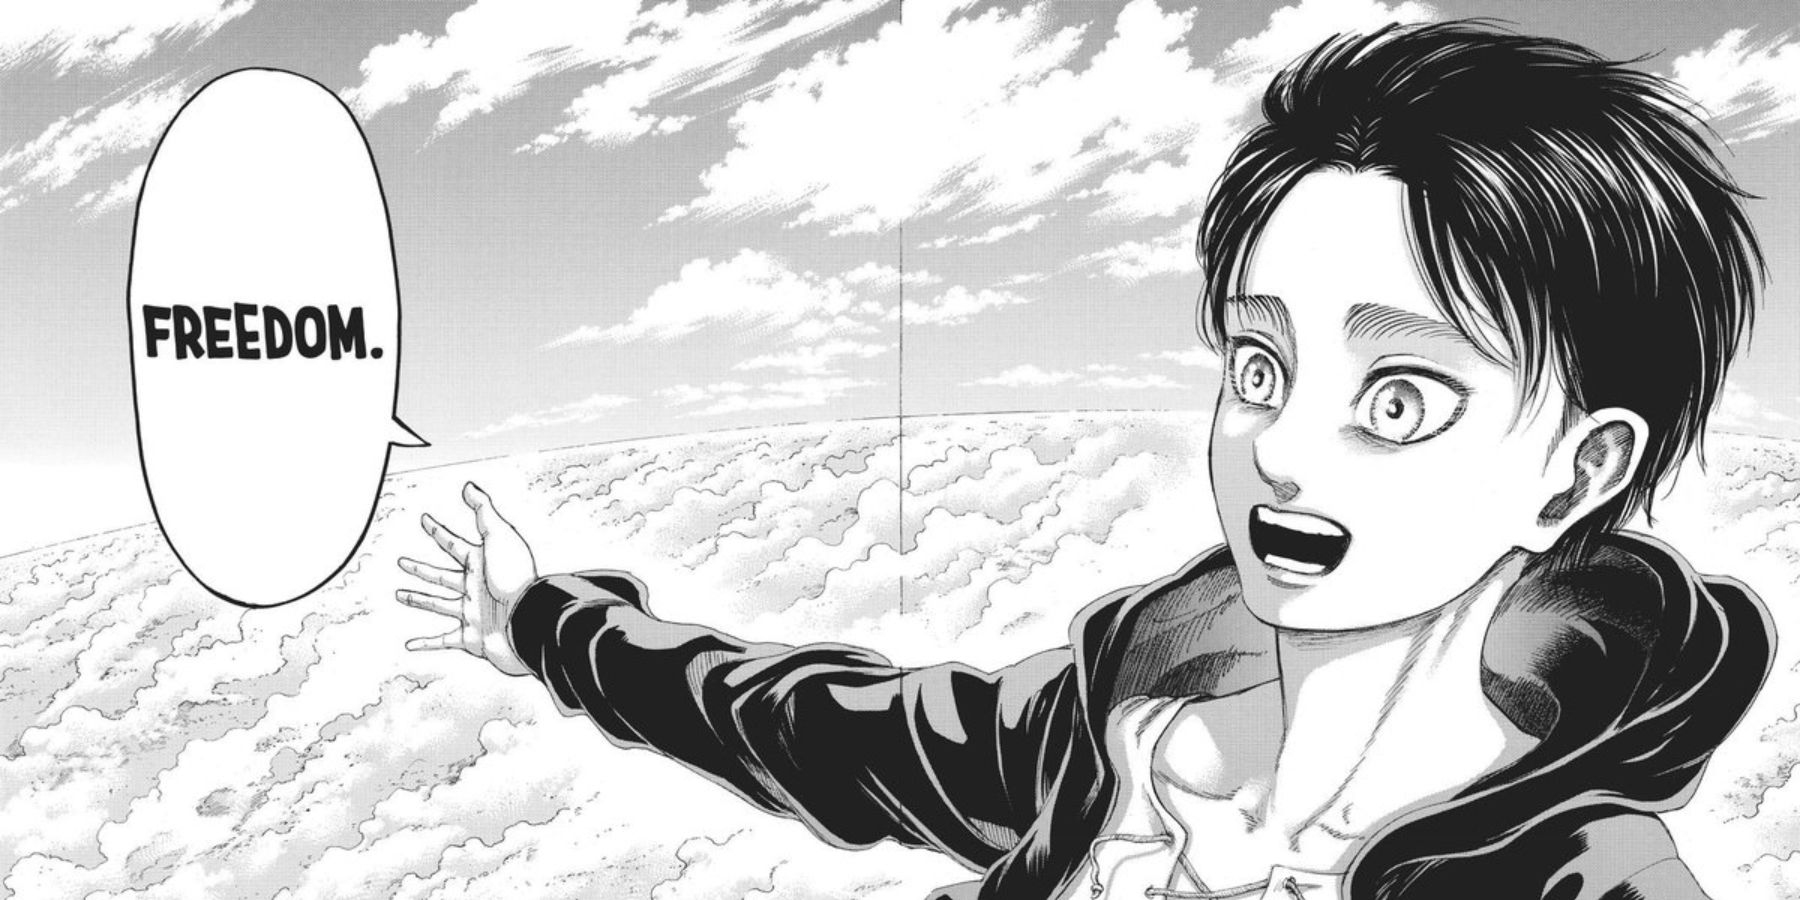 Eren Yeager in the Attack on Titan Manga